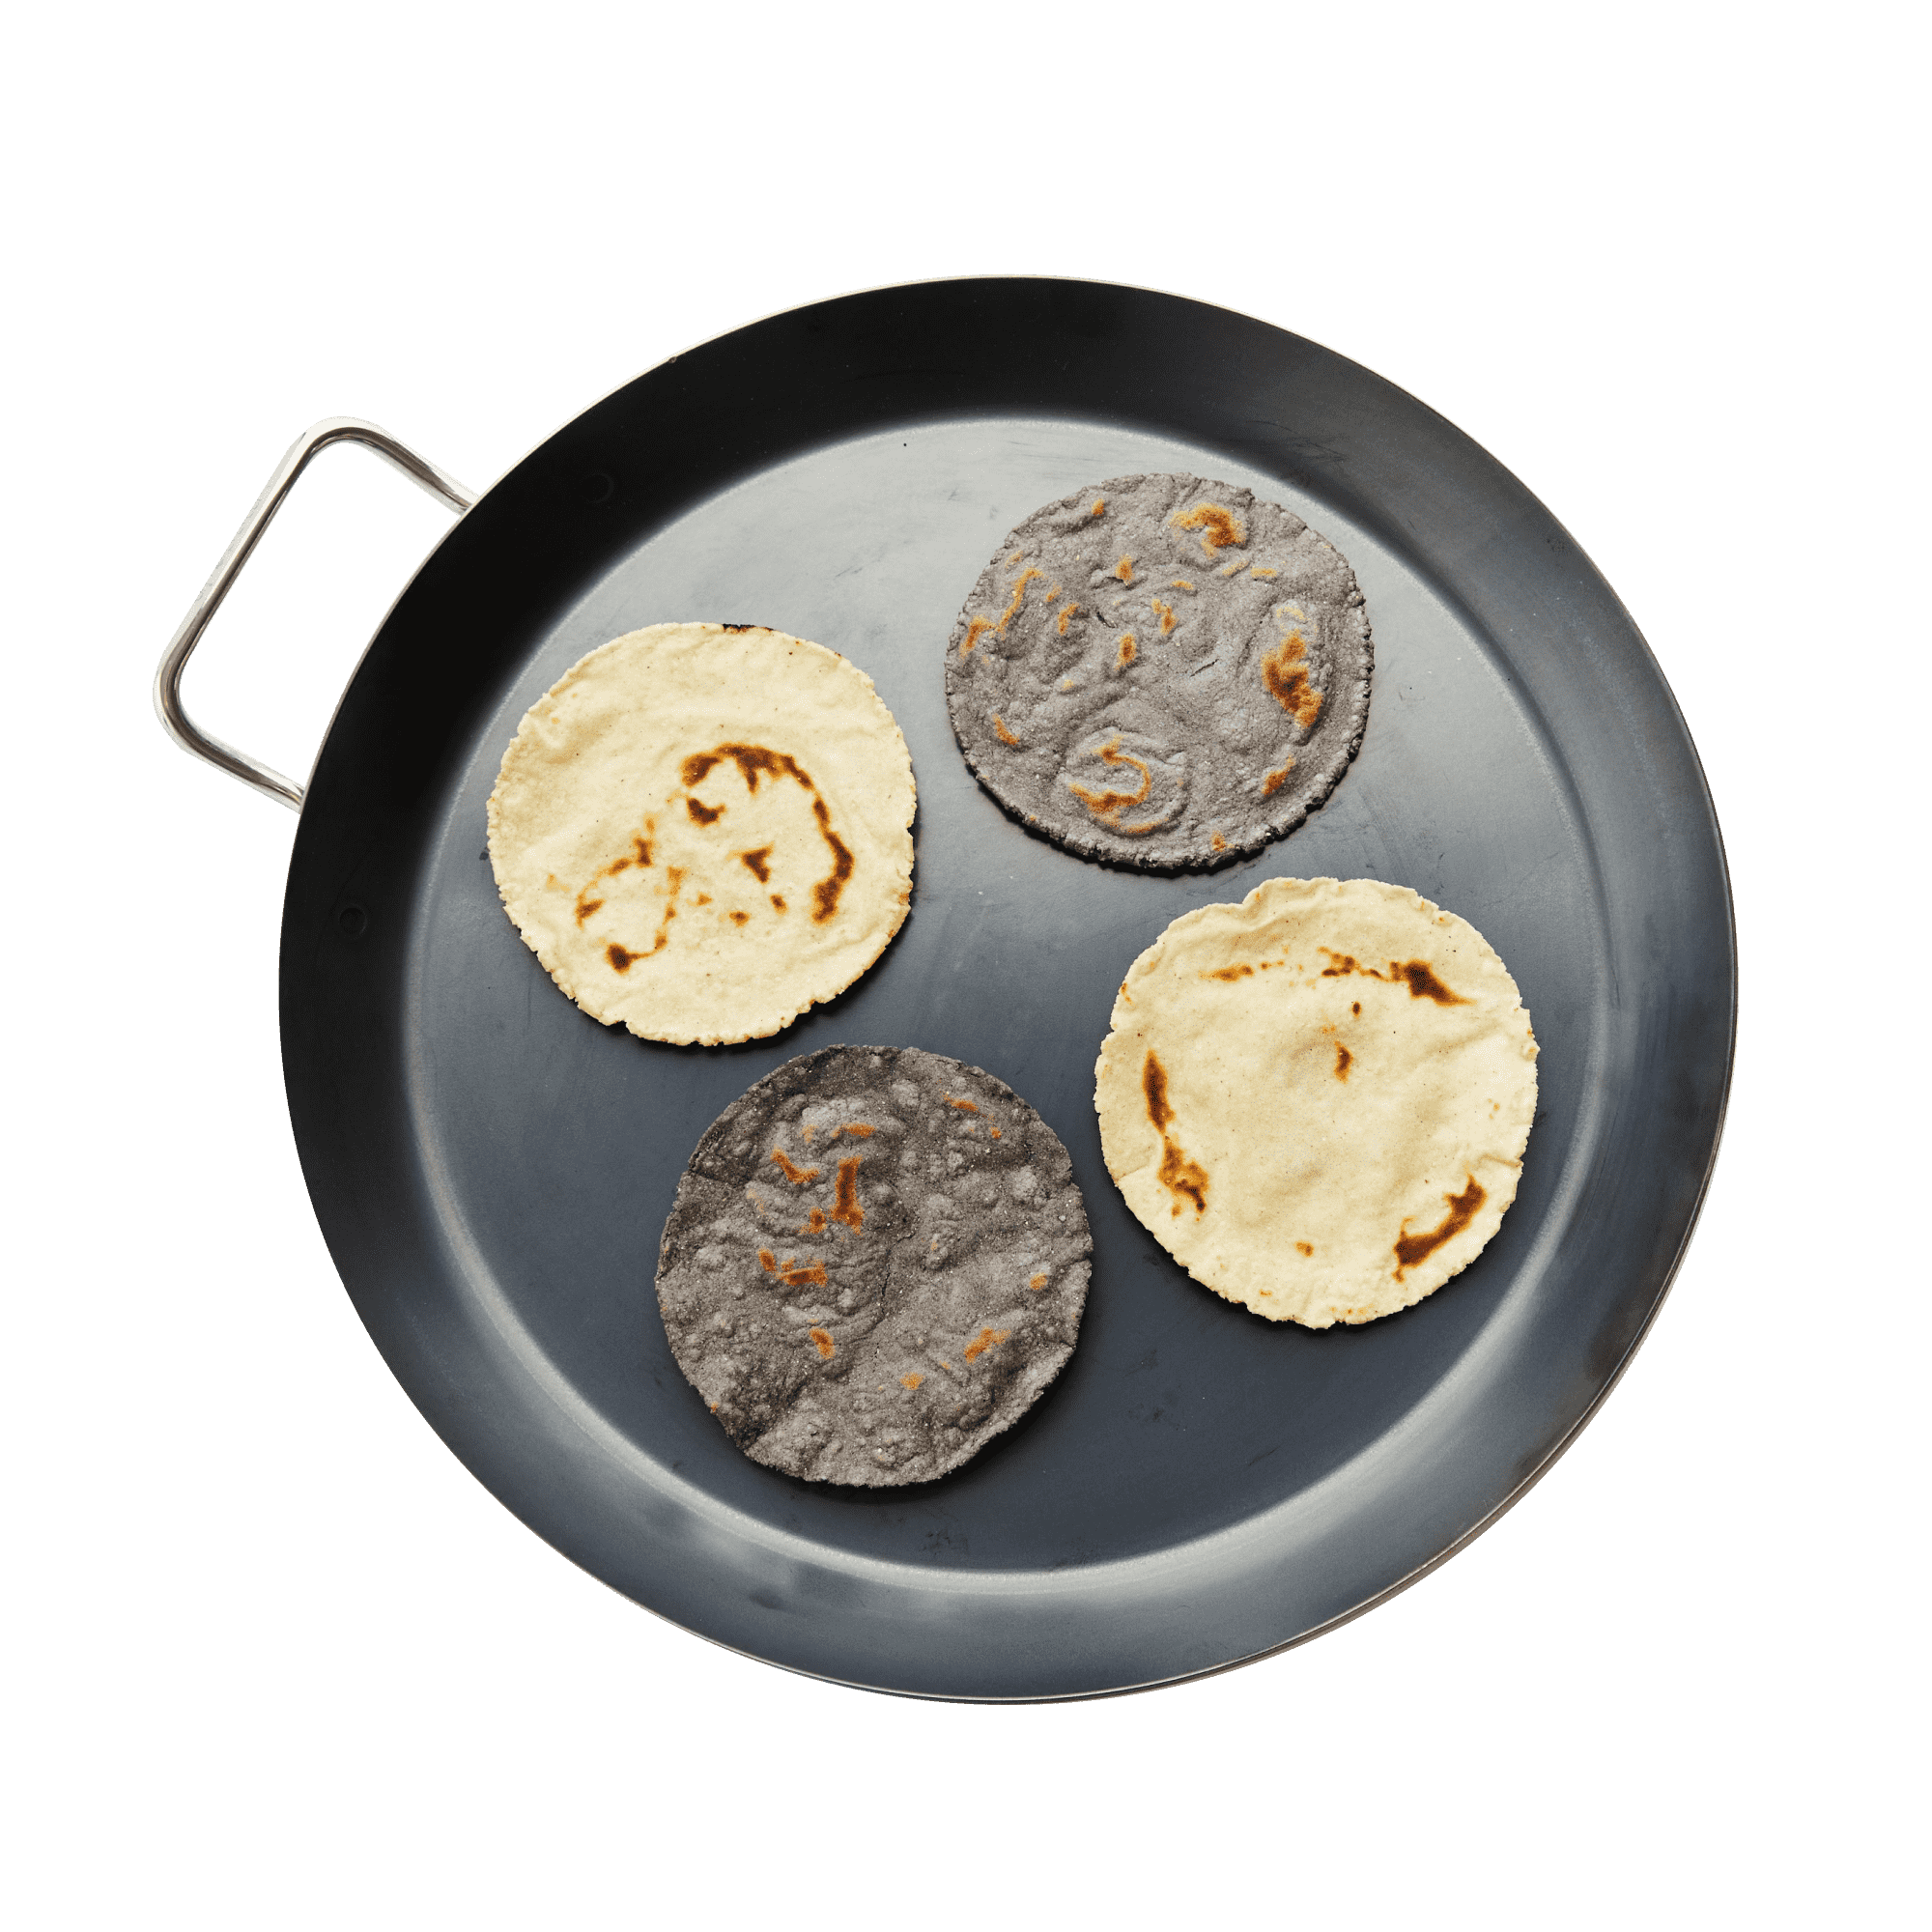 Comal by Made In x Masienda | Griddle Pan | #1 of #3